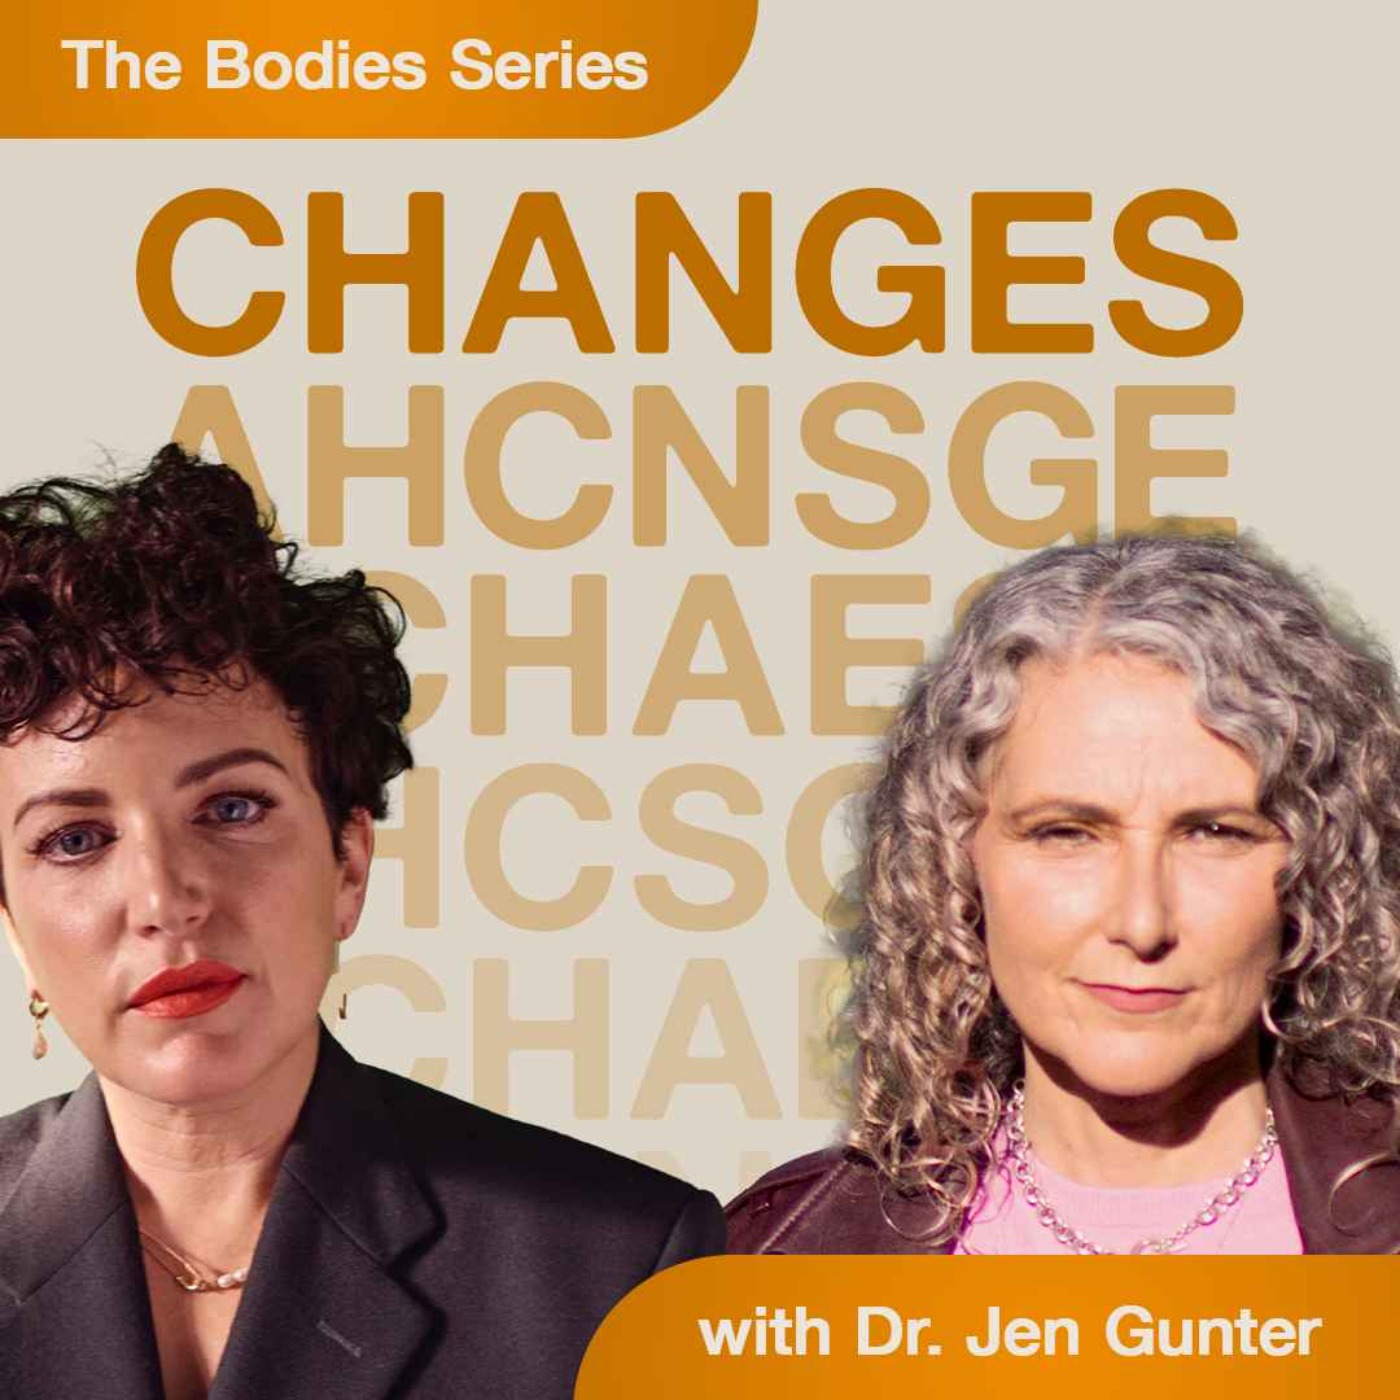 Dr. Jen Gunter answers your questions on sex, periods and menopause